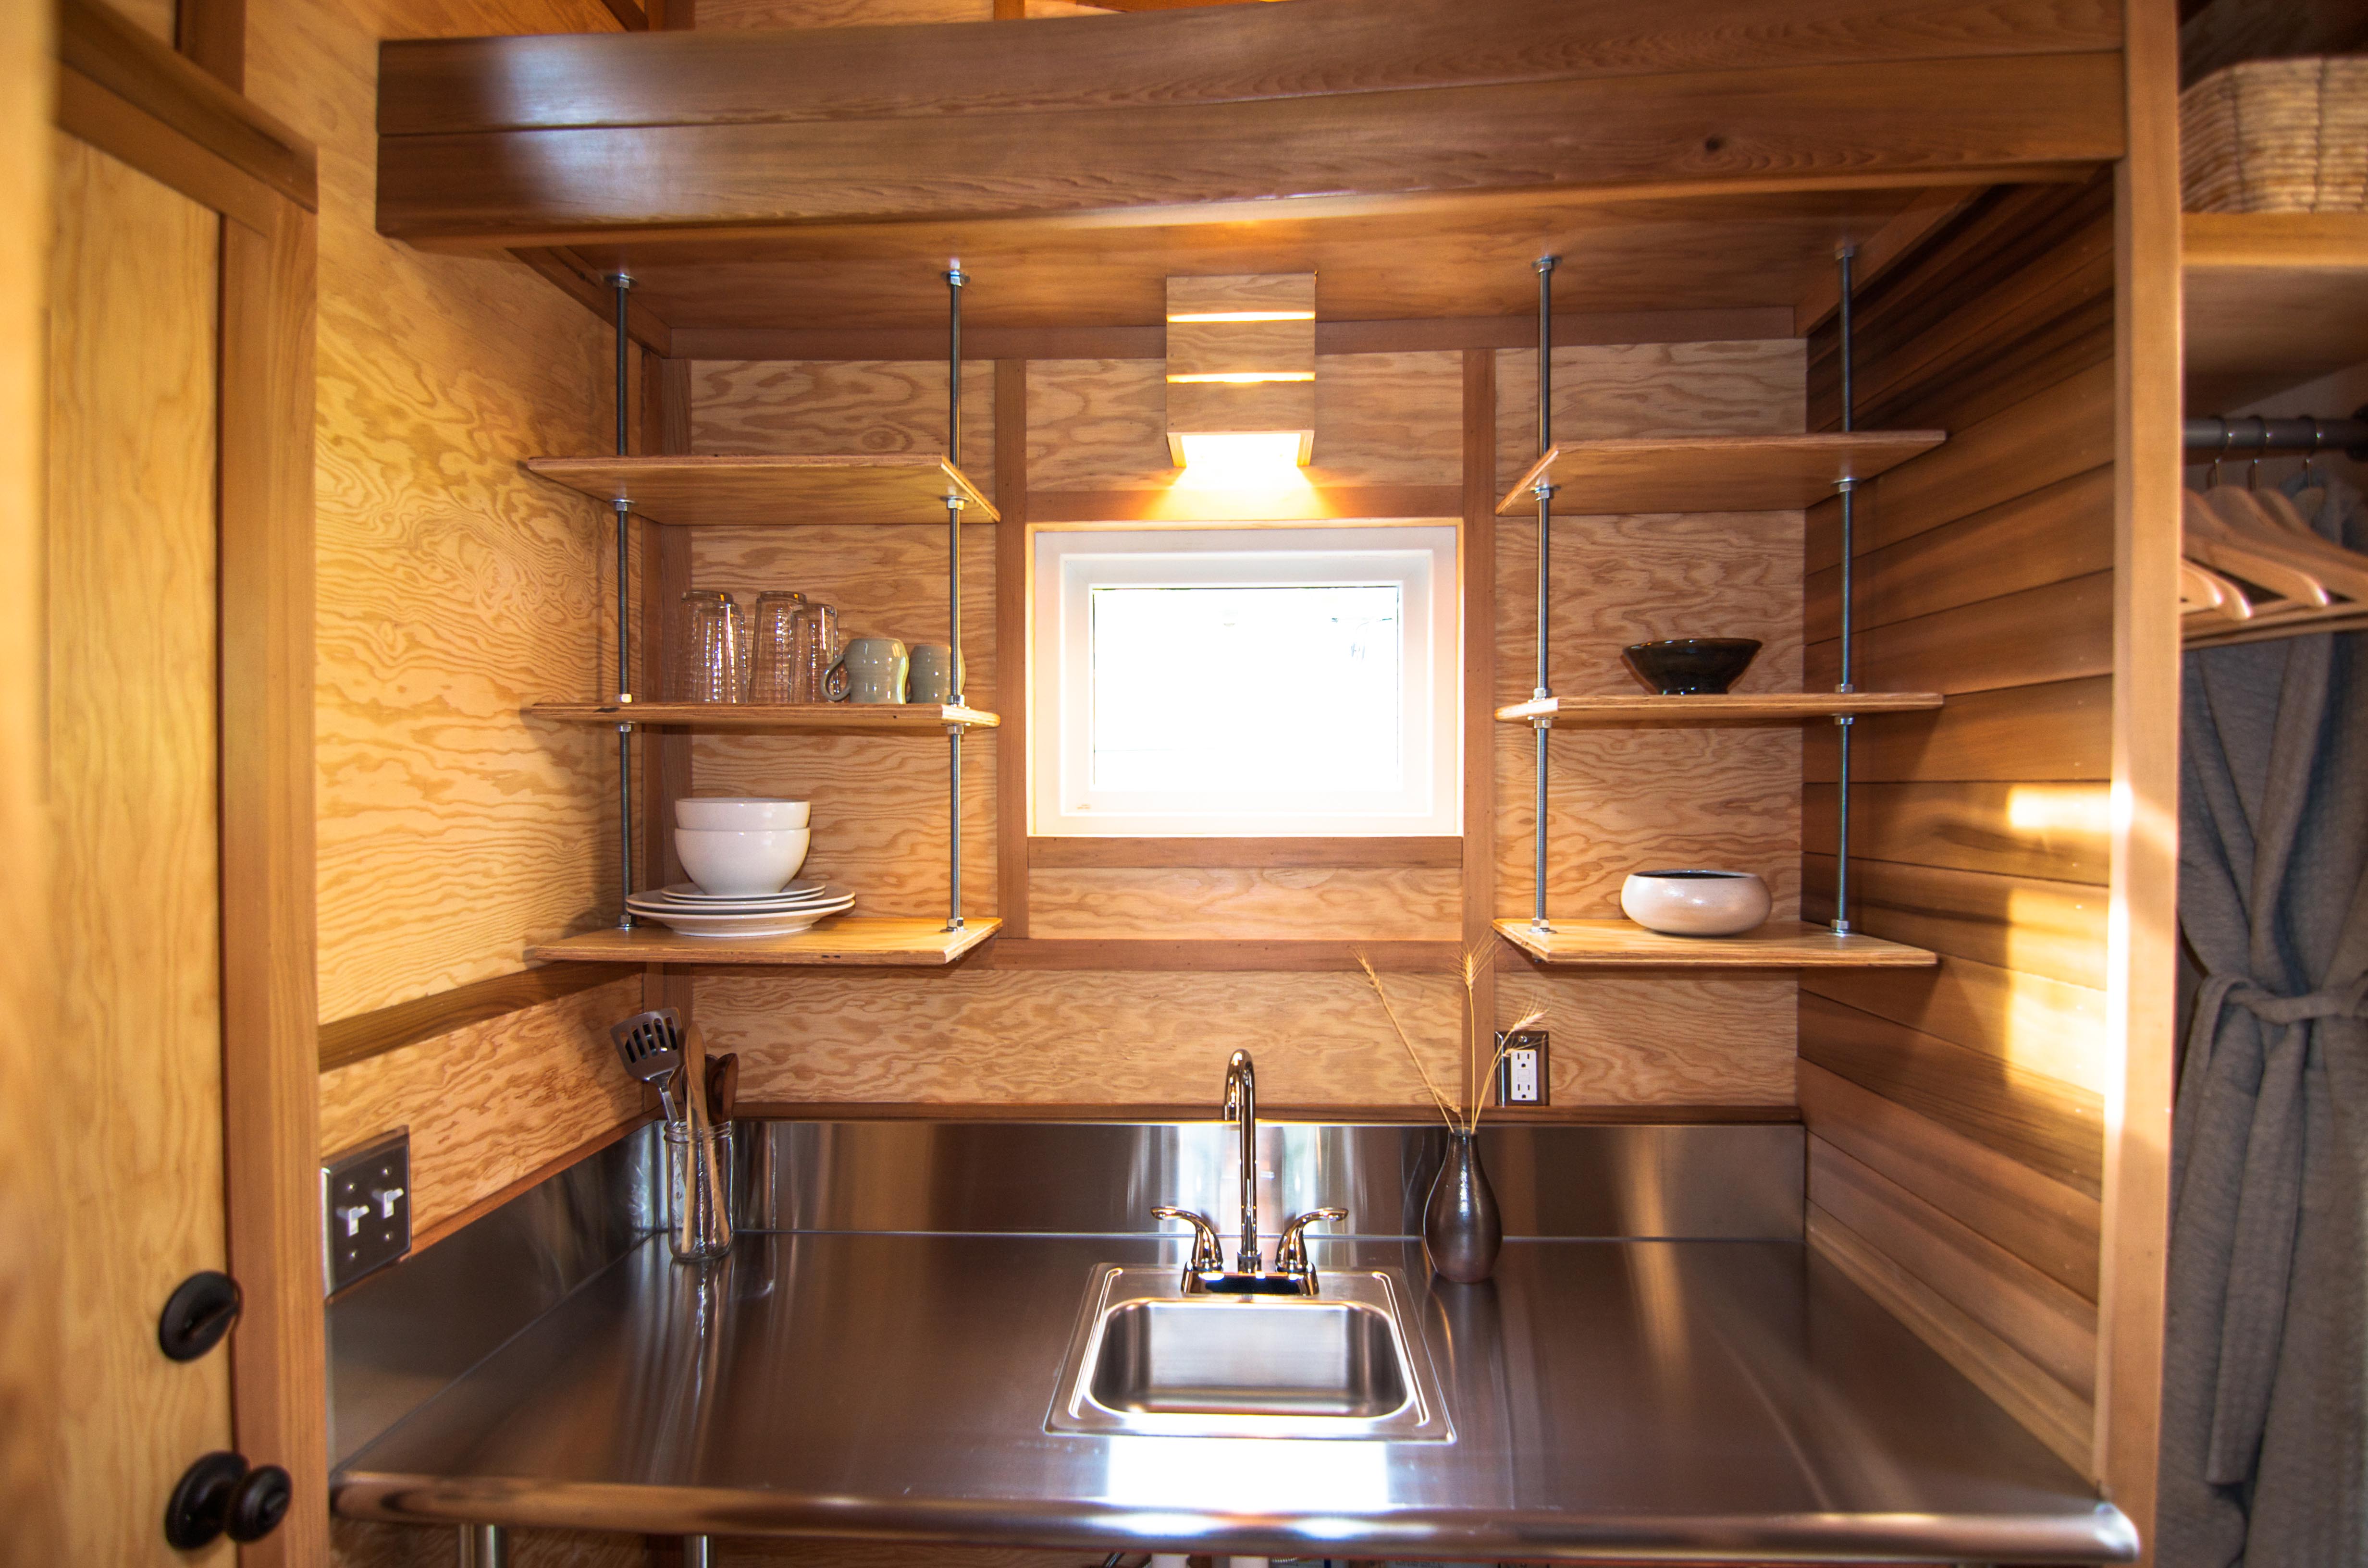 An Affordable Tiny House Design to Take Off the Grid or ...